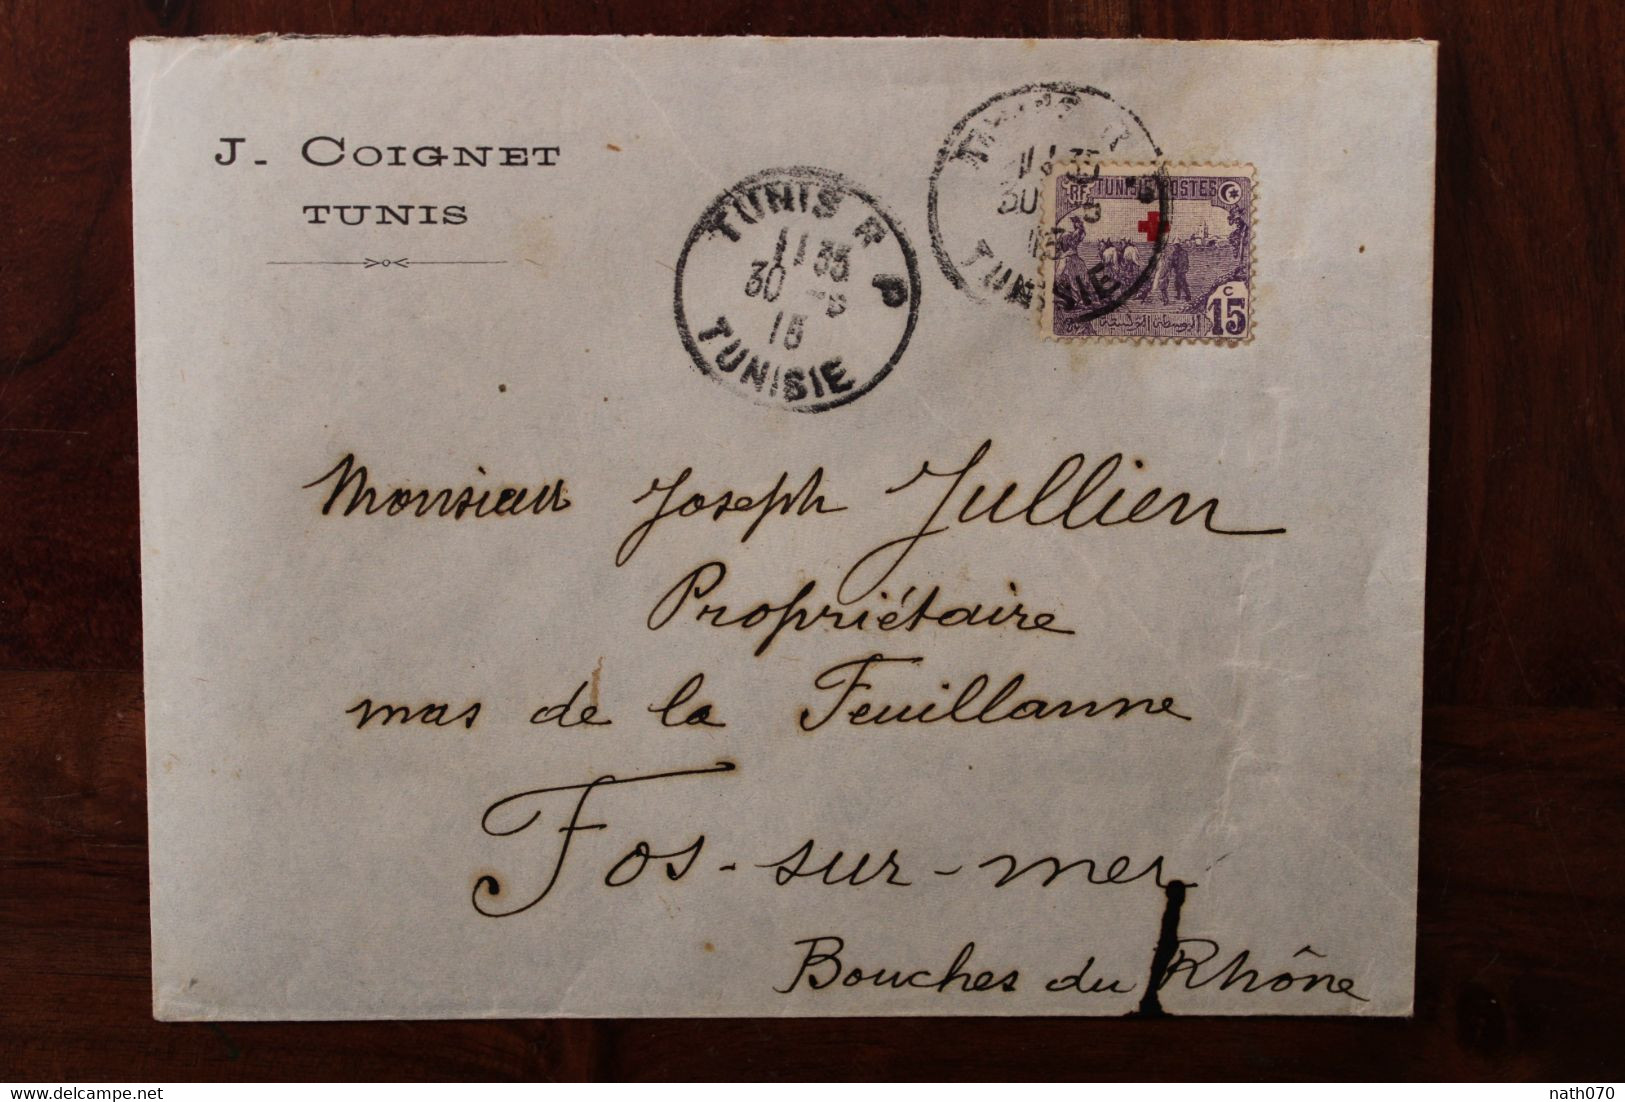 Tunisie 1915 Fos Sur Mer Surcharge Croix Rouge France Cover Colonie Ww1 Wk1 Timbre Seul - Lettres & Documents